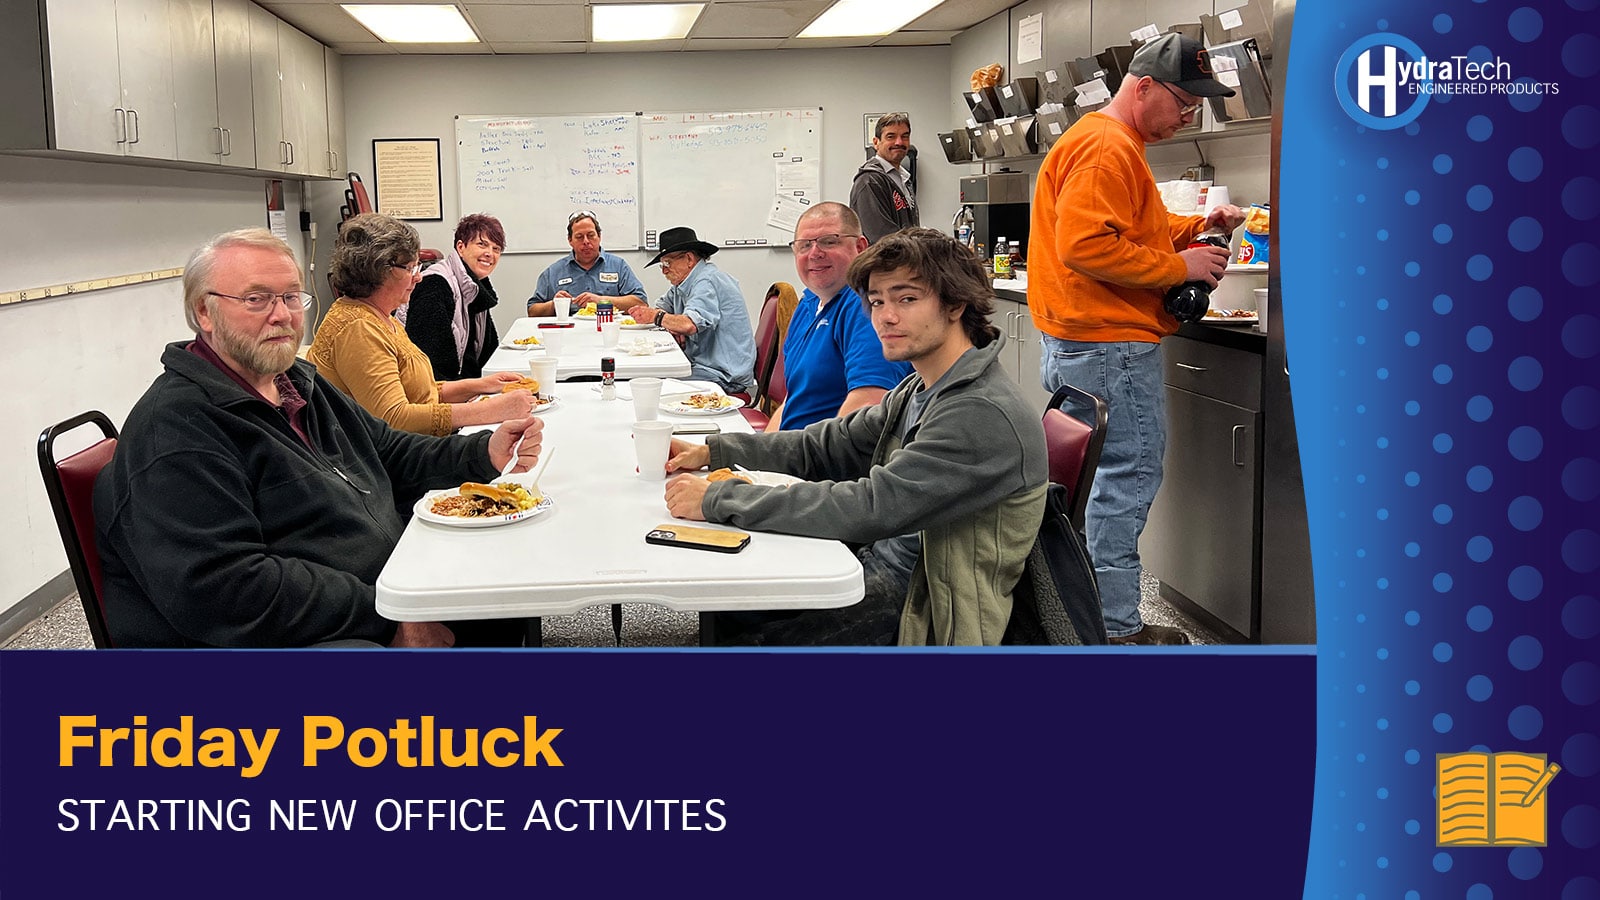 teaser image of employees gathering for the company potluck, 'Friday Potluck, Starting New Office Activities'